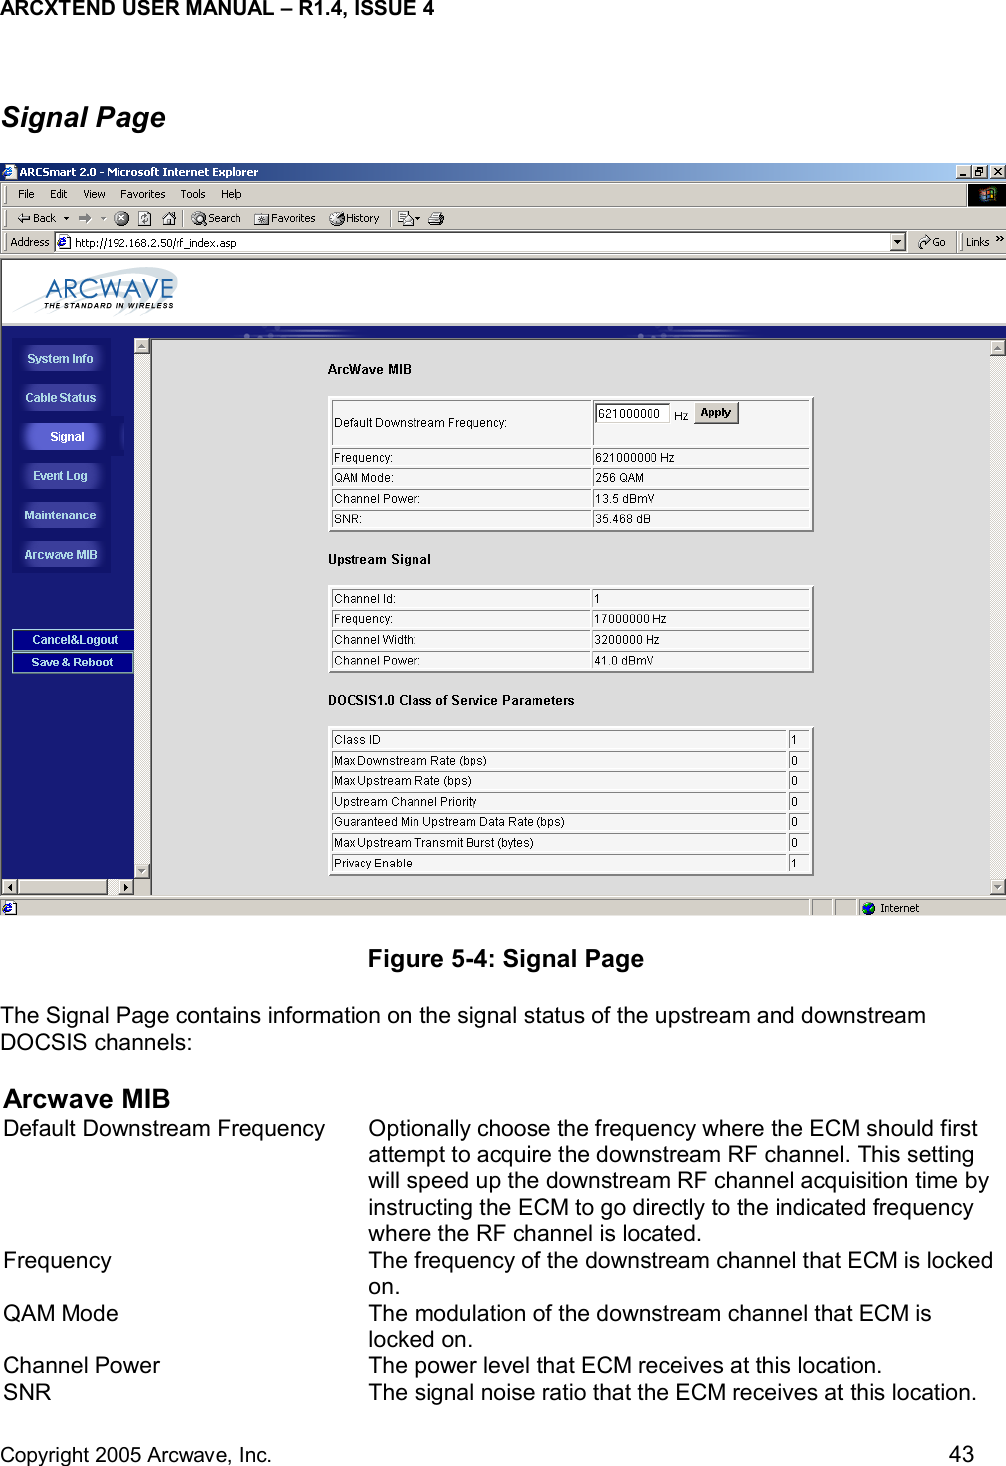 ARCXTEND USER MANUAL – R1.4, ISSUE 4  Copyright 2005 Arcwave, Inc.    43 Signal Page  Figure 5-4: Signal Page The Signal Page contains information on the signal status of the upstream and downstream DOCSIS channels: Arcwave MIB Default Downstream Frequency  Optionally choose the frequency where the ECM should first attempt to acquire the downstream RF channel. This setting will speed up the downstream RF channel acquisition time by instructing the ECM to go directly to the indicated frequency where the RF channel is located.  Frequency  The frequency of the downstream channel that ECM is locked on. QAM Mode  The modulation of the downstream channel that ECM is locked on. Channel Power  The power level that ECM receives at this location. SNR  The signal noise ratio that the ECM receives at this location. 